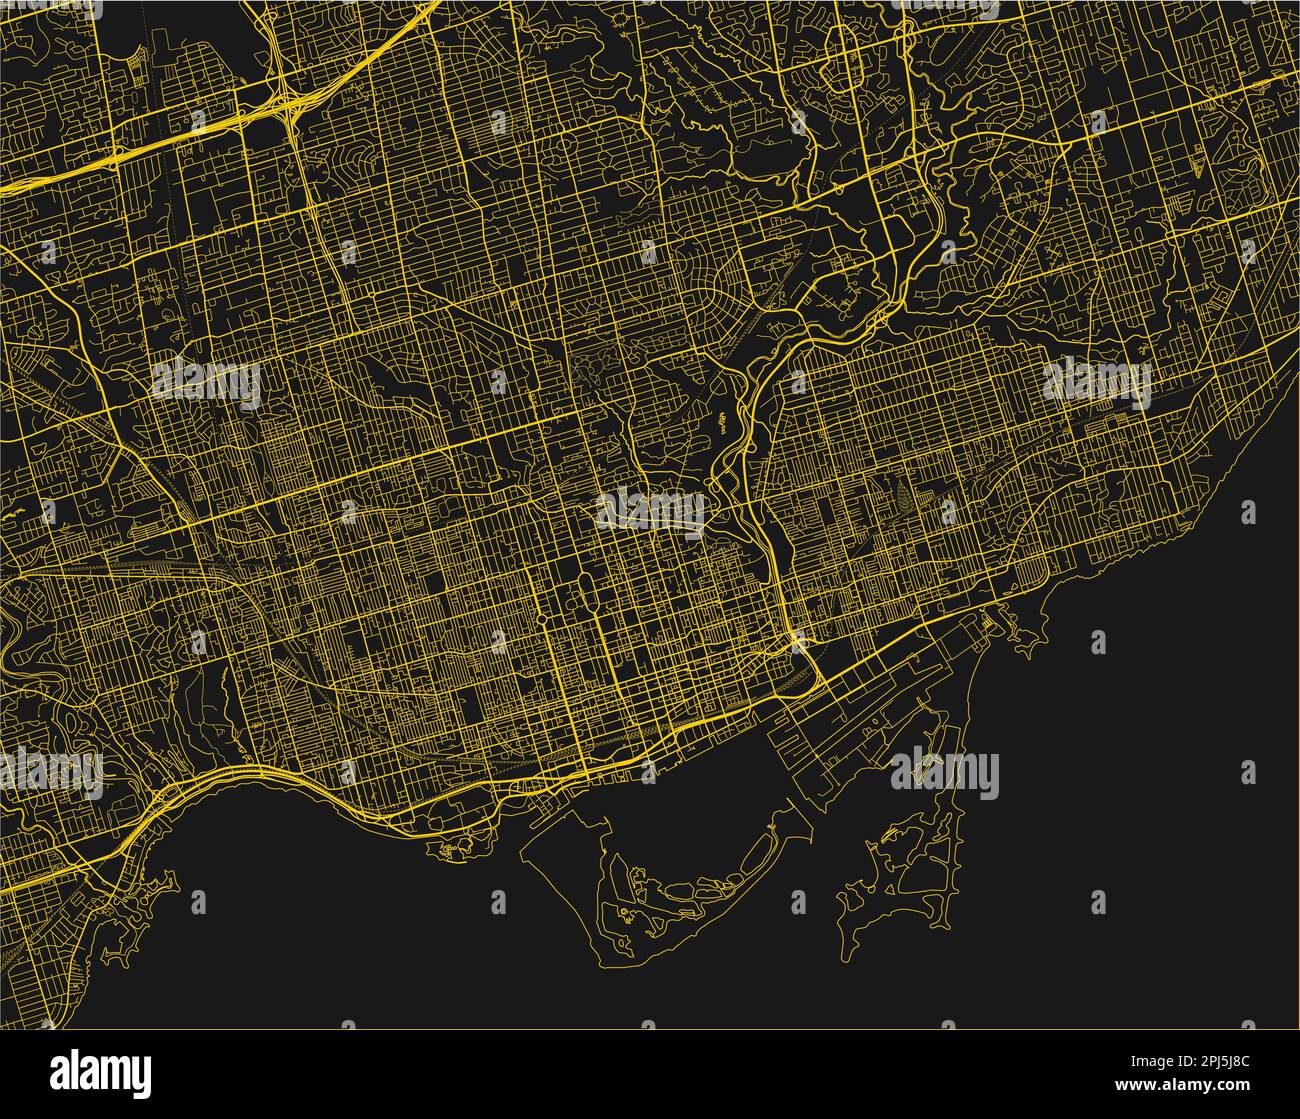 Black and yellow vector city map of Toronto with well organized separated layers. Stock Vector